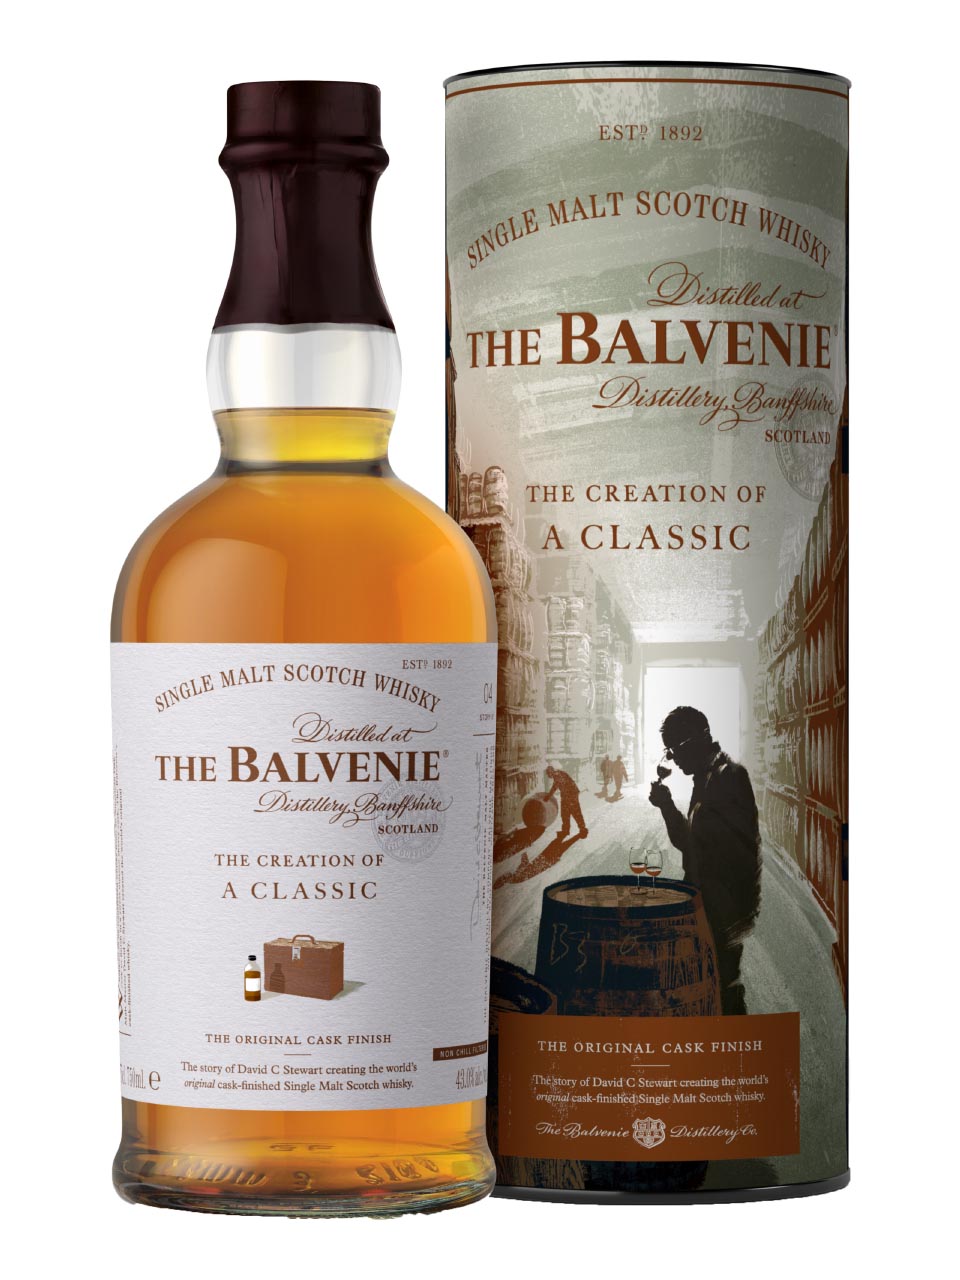 The Balvenie The Creation of A Classic Speyside Single Malt Scotch Whisky 43% 0.7L Gift Pack null - onesize - 1